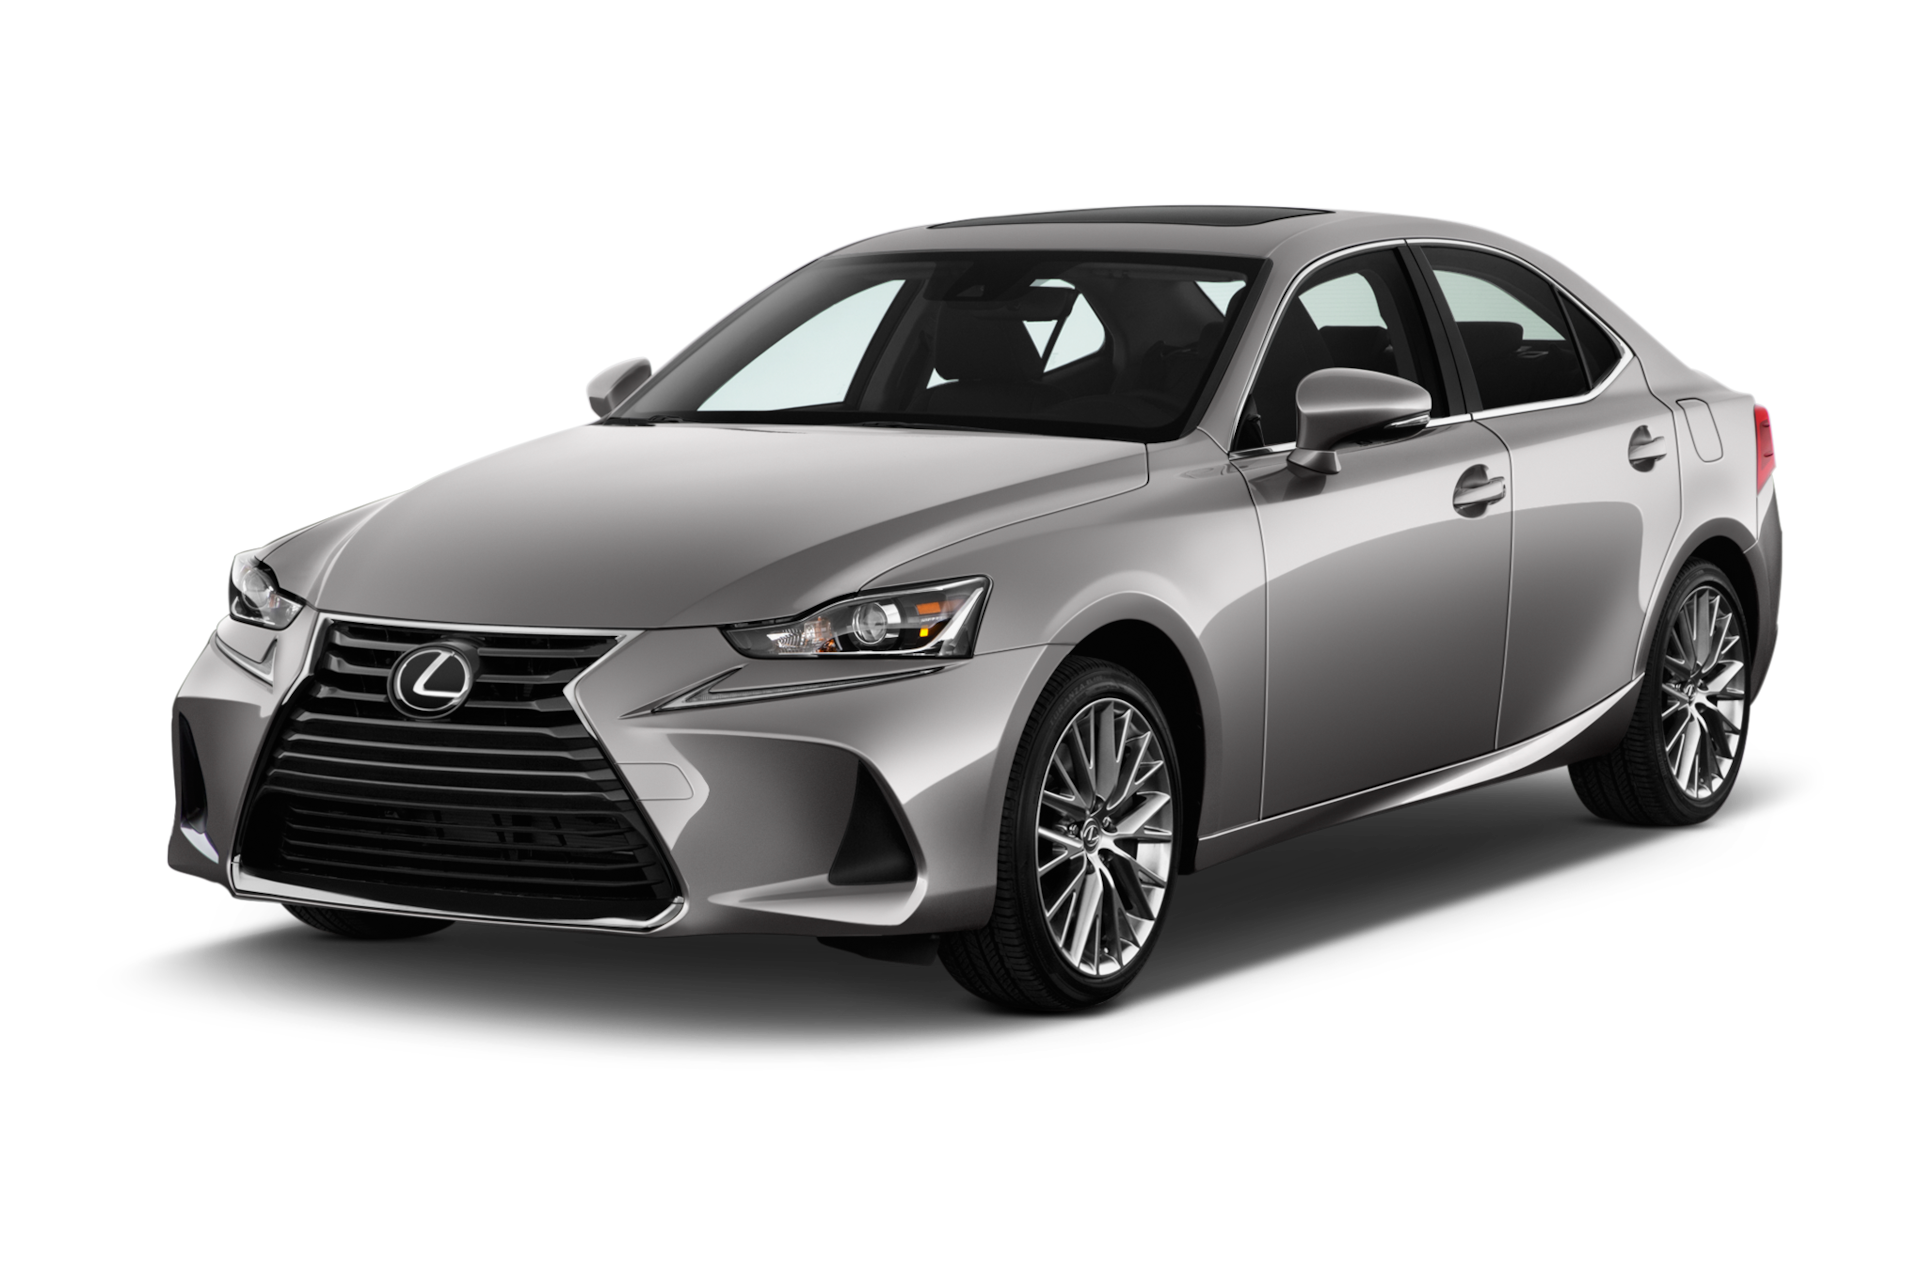 2018 Lexus IS Prices, Reviews, and Photos - MotorTrend